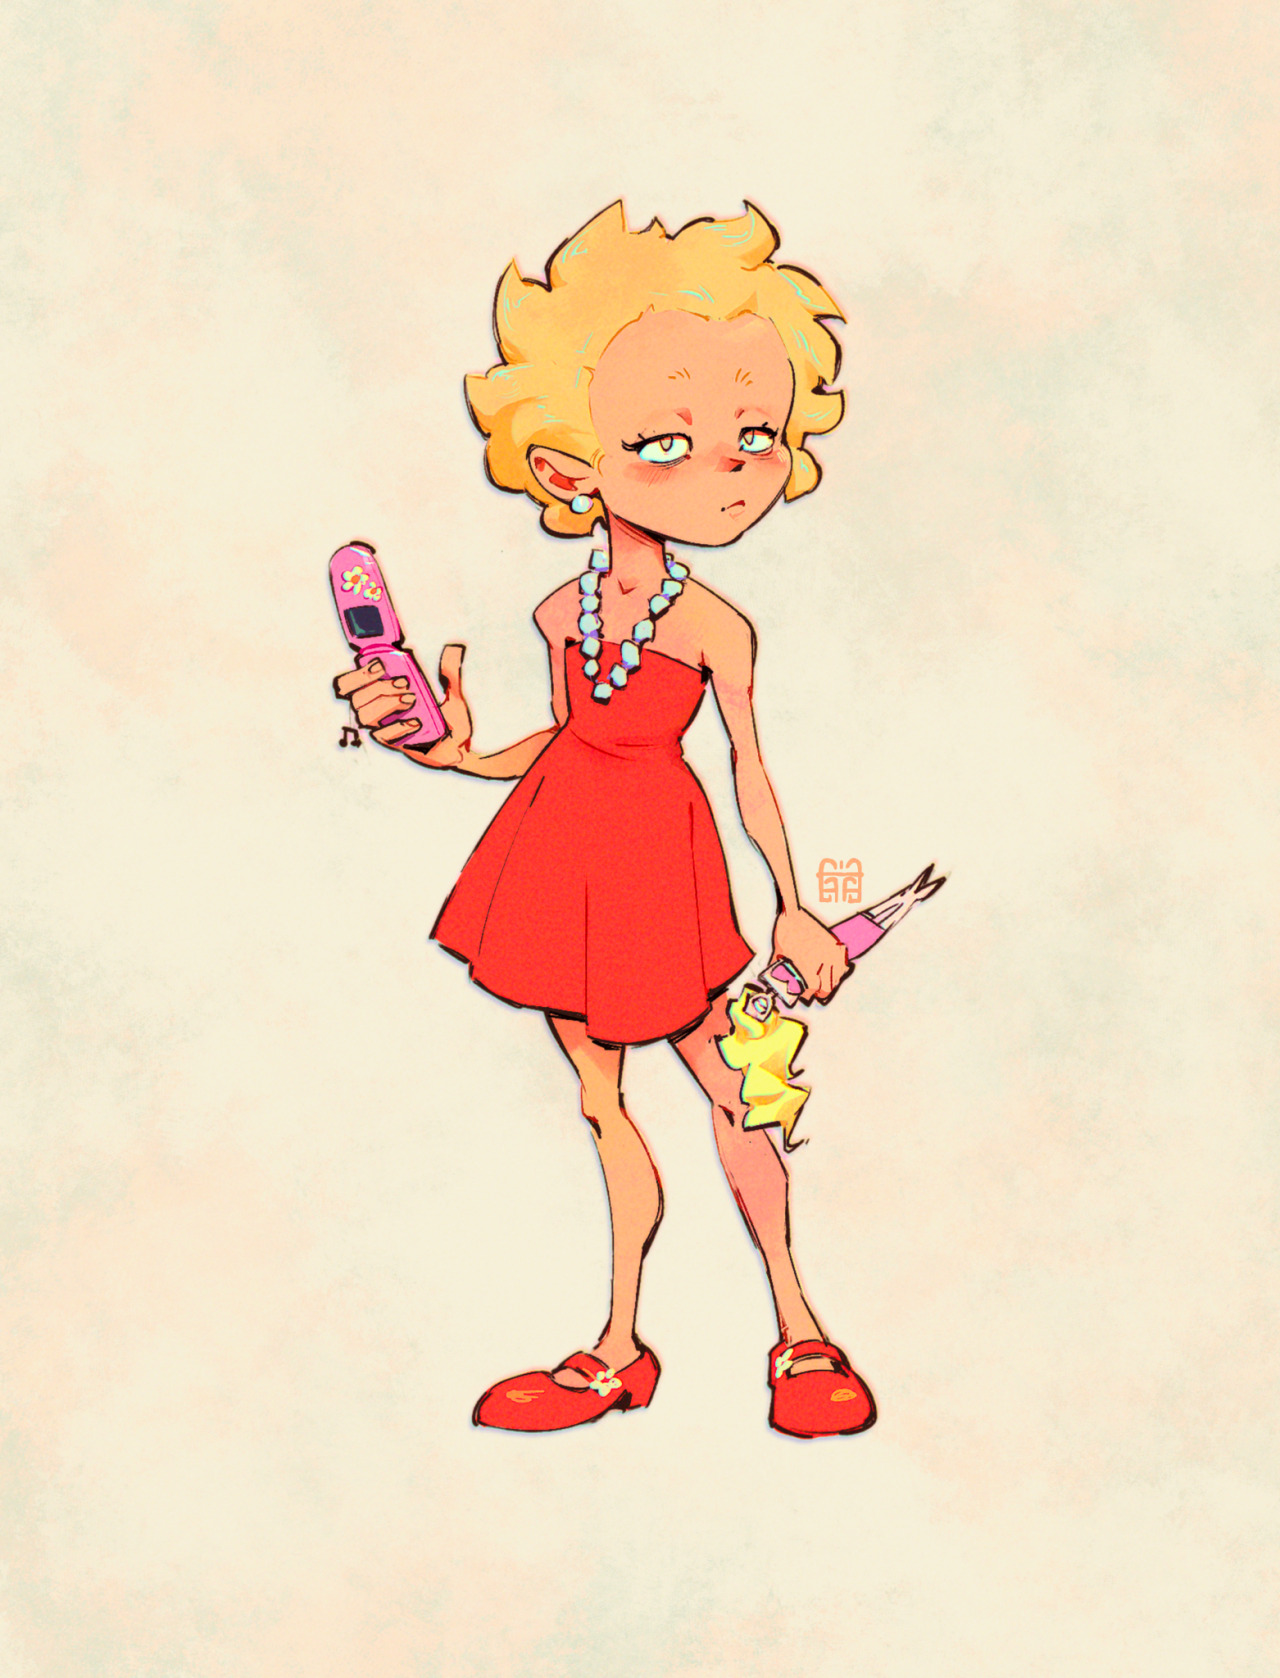 lisa simpson in more detailed style holding a pink flipphone, in her other hand she holds malibu stacy doll. Lisa is unbothered